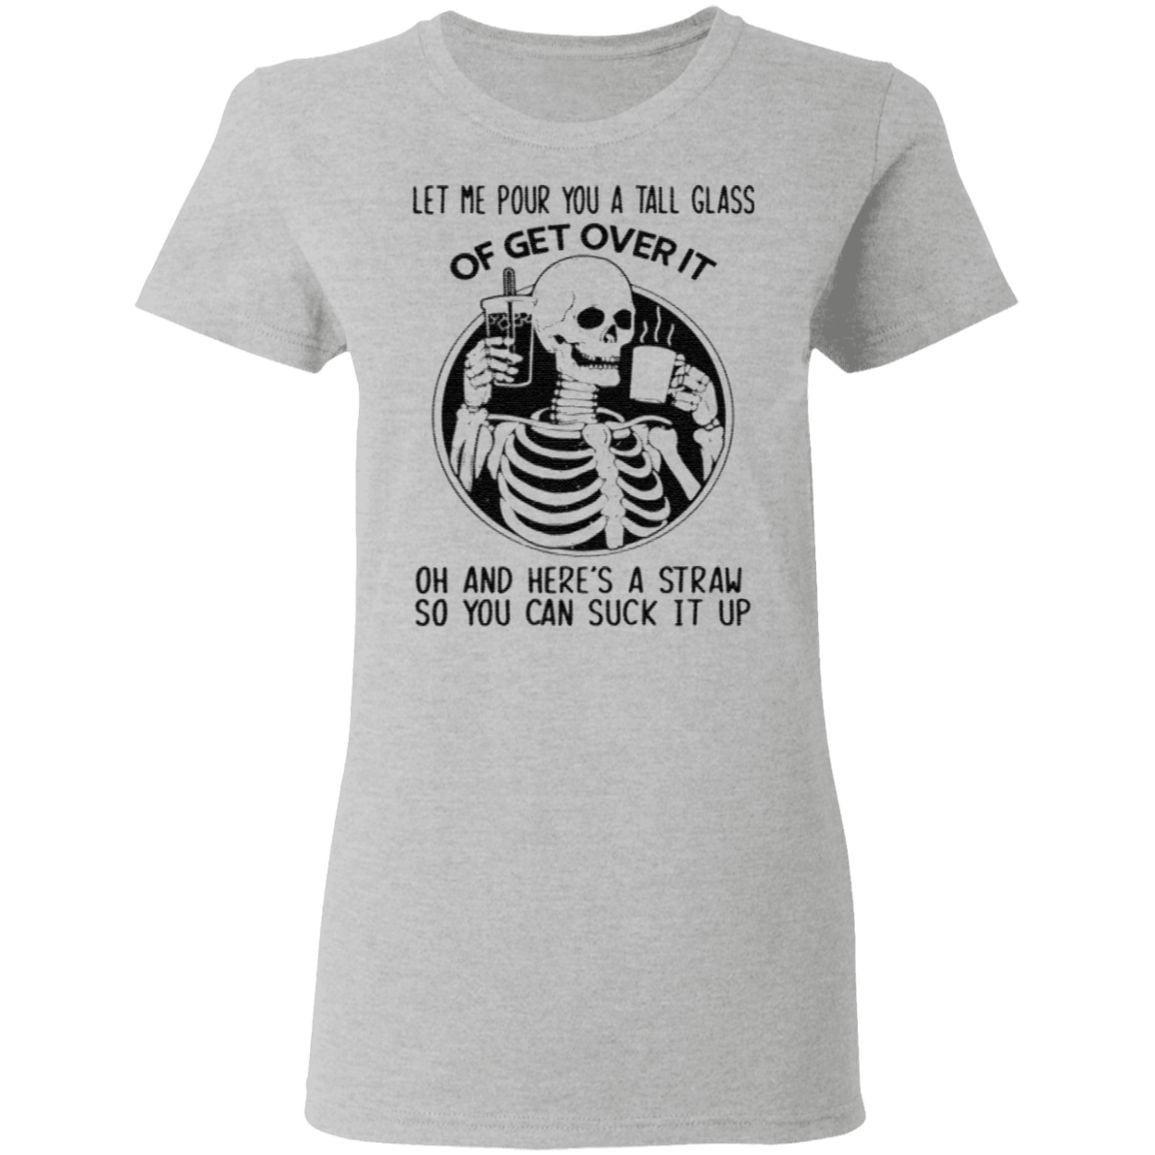 Let Me pour you a tall glass of get over it oh and here’s a straw so you can suck it up t shirt